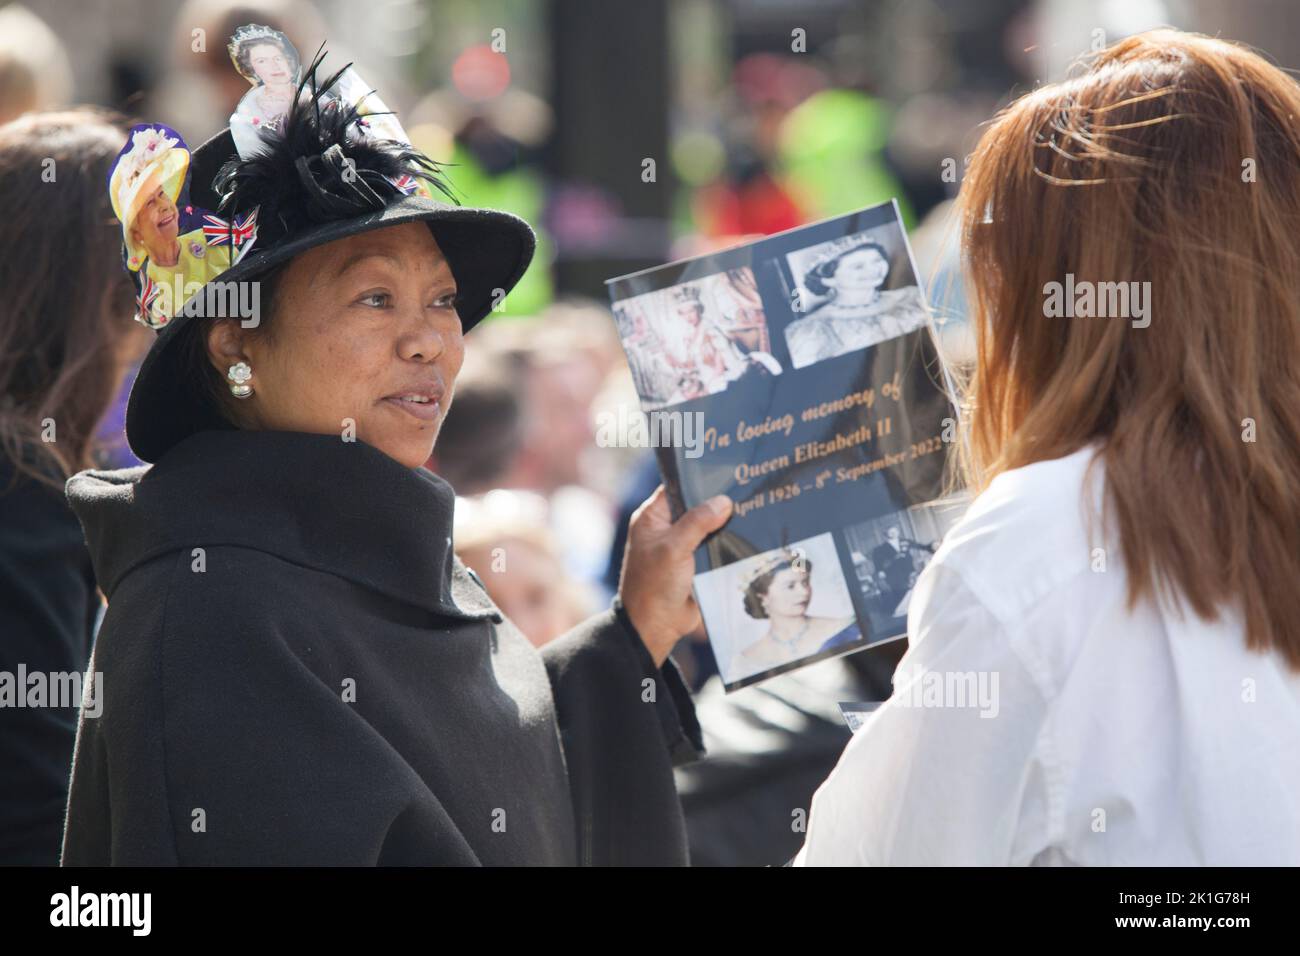 London, UK, 18 September 2022: Crowds are filling the streets of Whitehall to pay their respects to the late monarch Queen Elizabeth II, whose funeral takes place tomorrow. Some people are camping along the processional route that the coffin will take after the service at Westminster Abbey.  Anna Watson/Alamy Live News Stock Photo